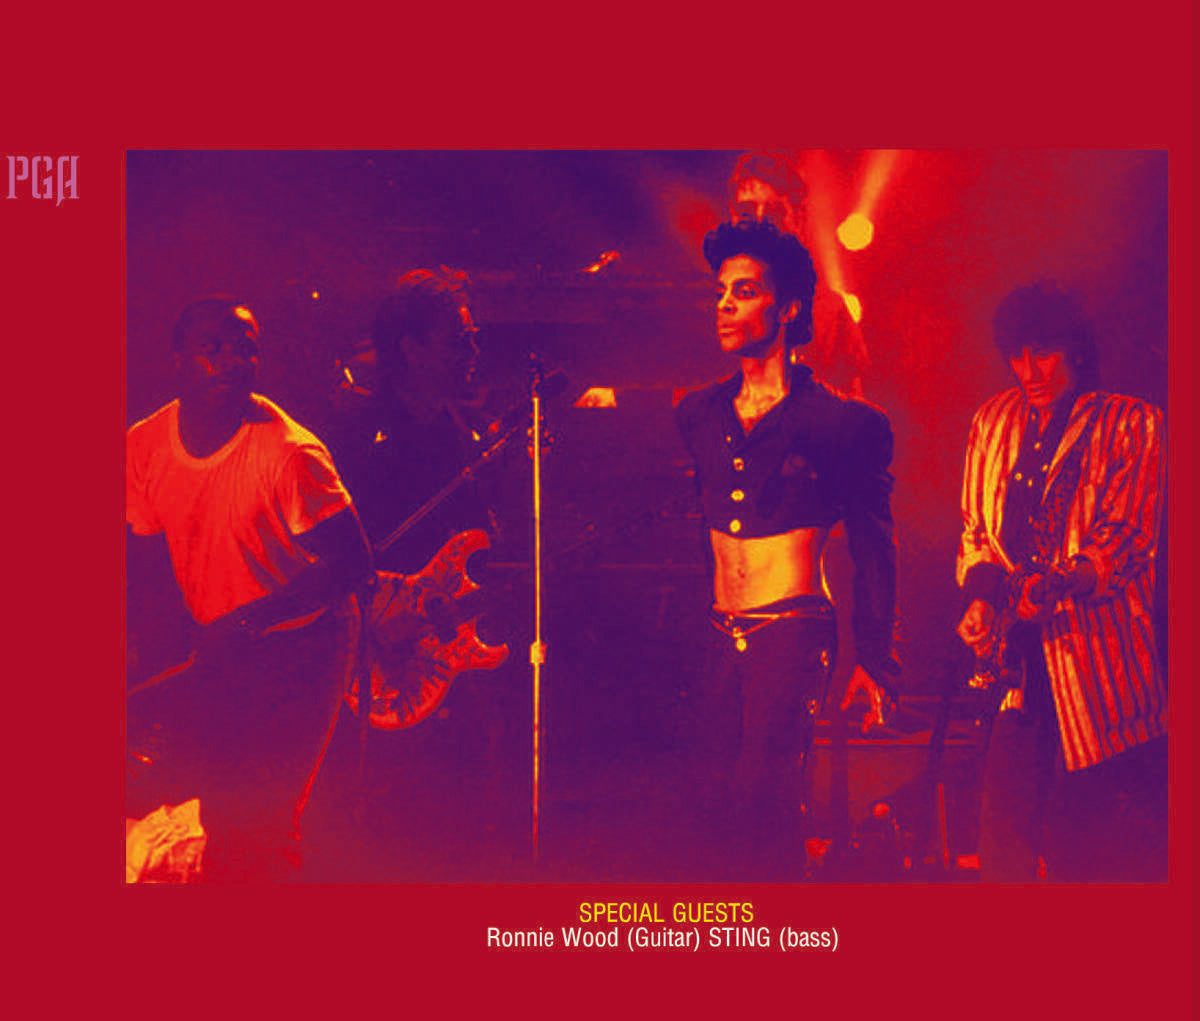 PRINCE AND THE REVOLUTION / HOT AUGUST NIGHTS : WEMBLEY LONDON 1986